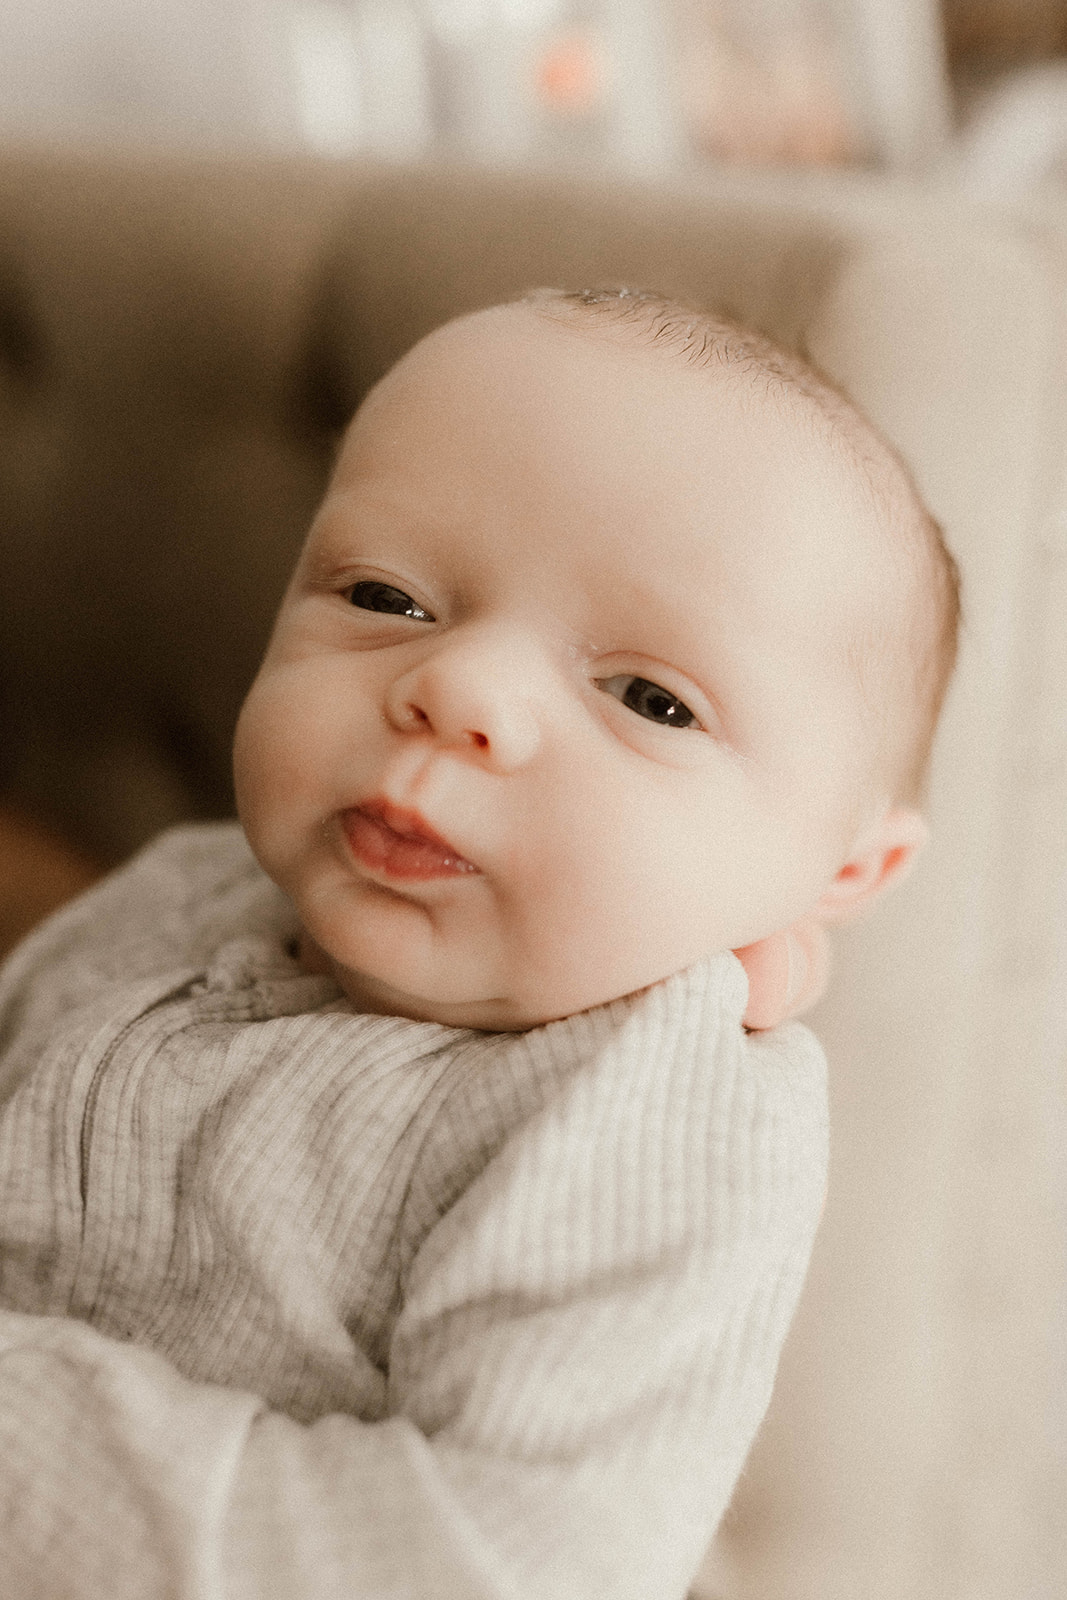 Little man poses for the camera duing this in home newborn photography session